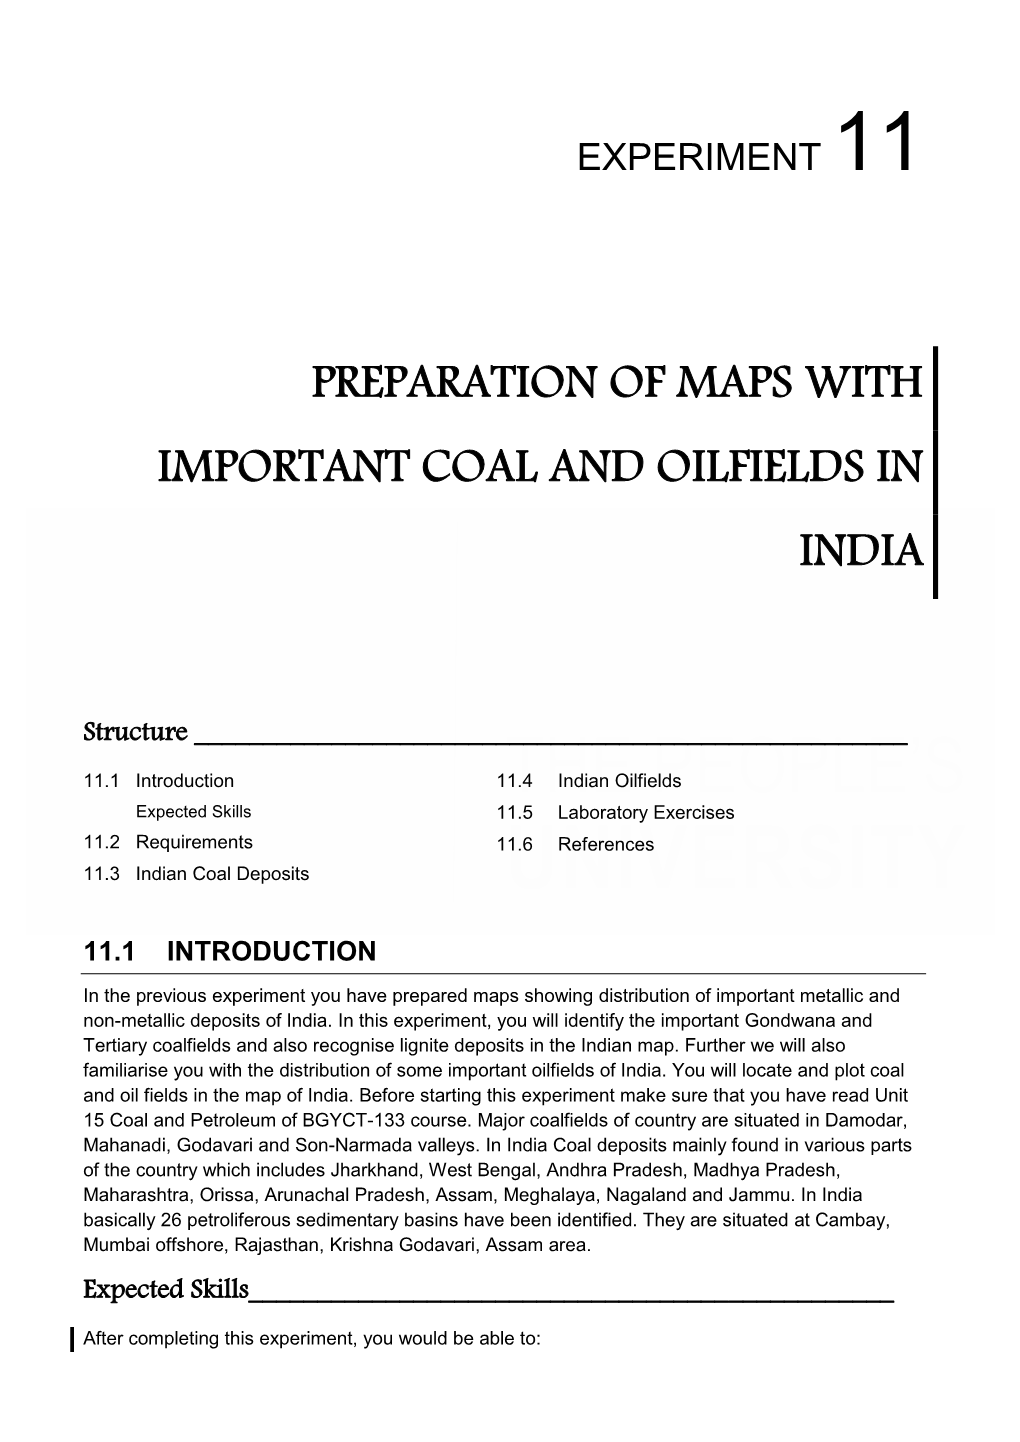 Preparation of Maps with Important Coal and Oilfields In